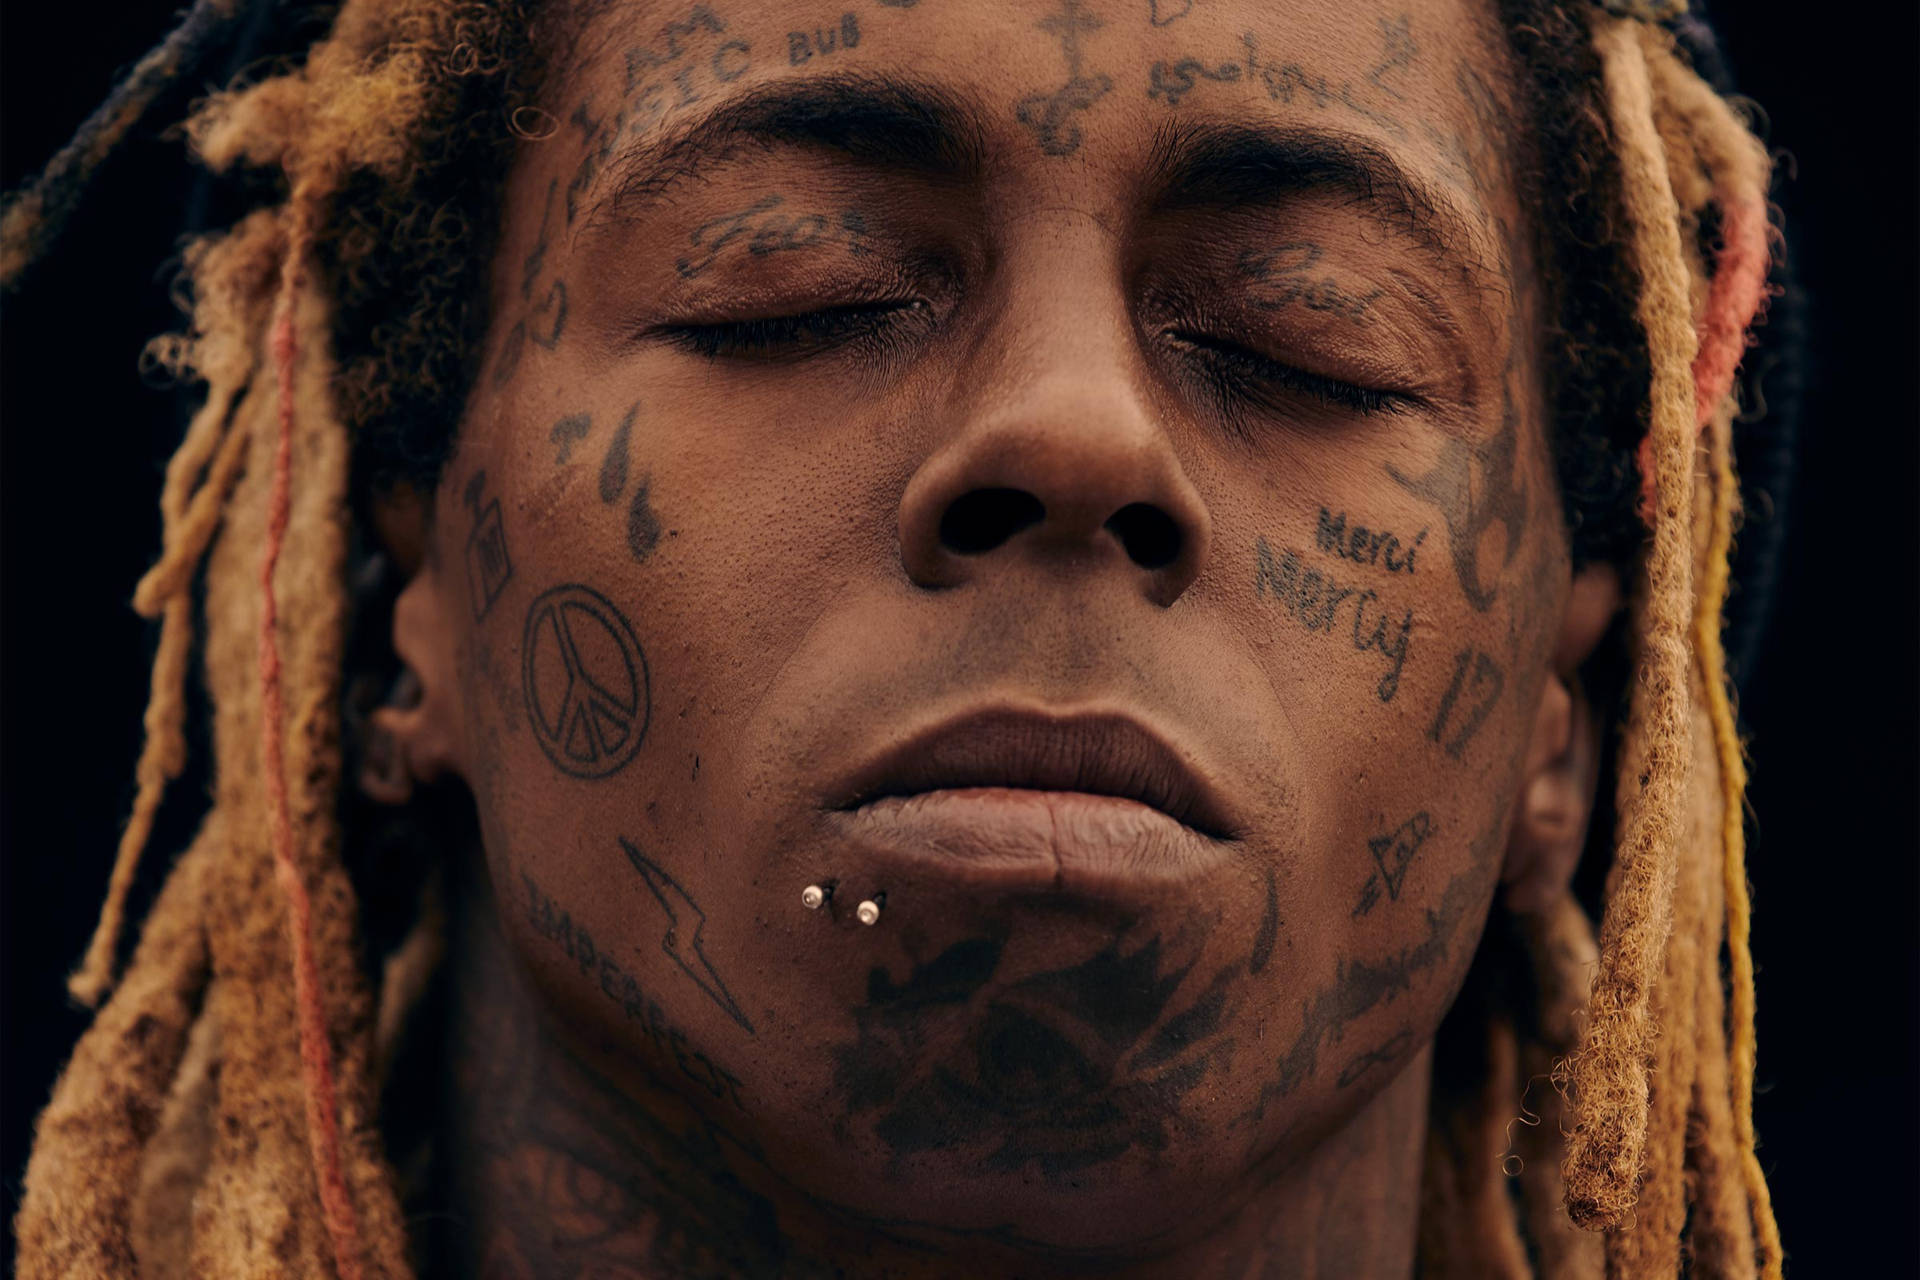 2400X1600 Lil Wayne Wallpaper and Background